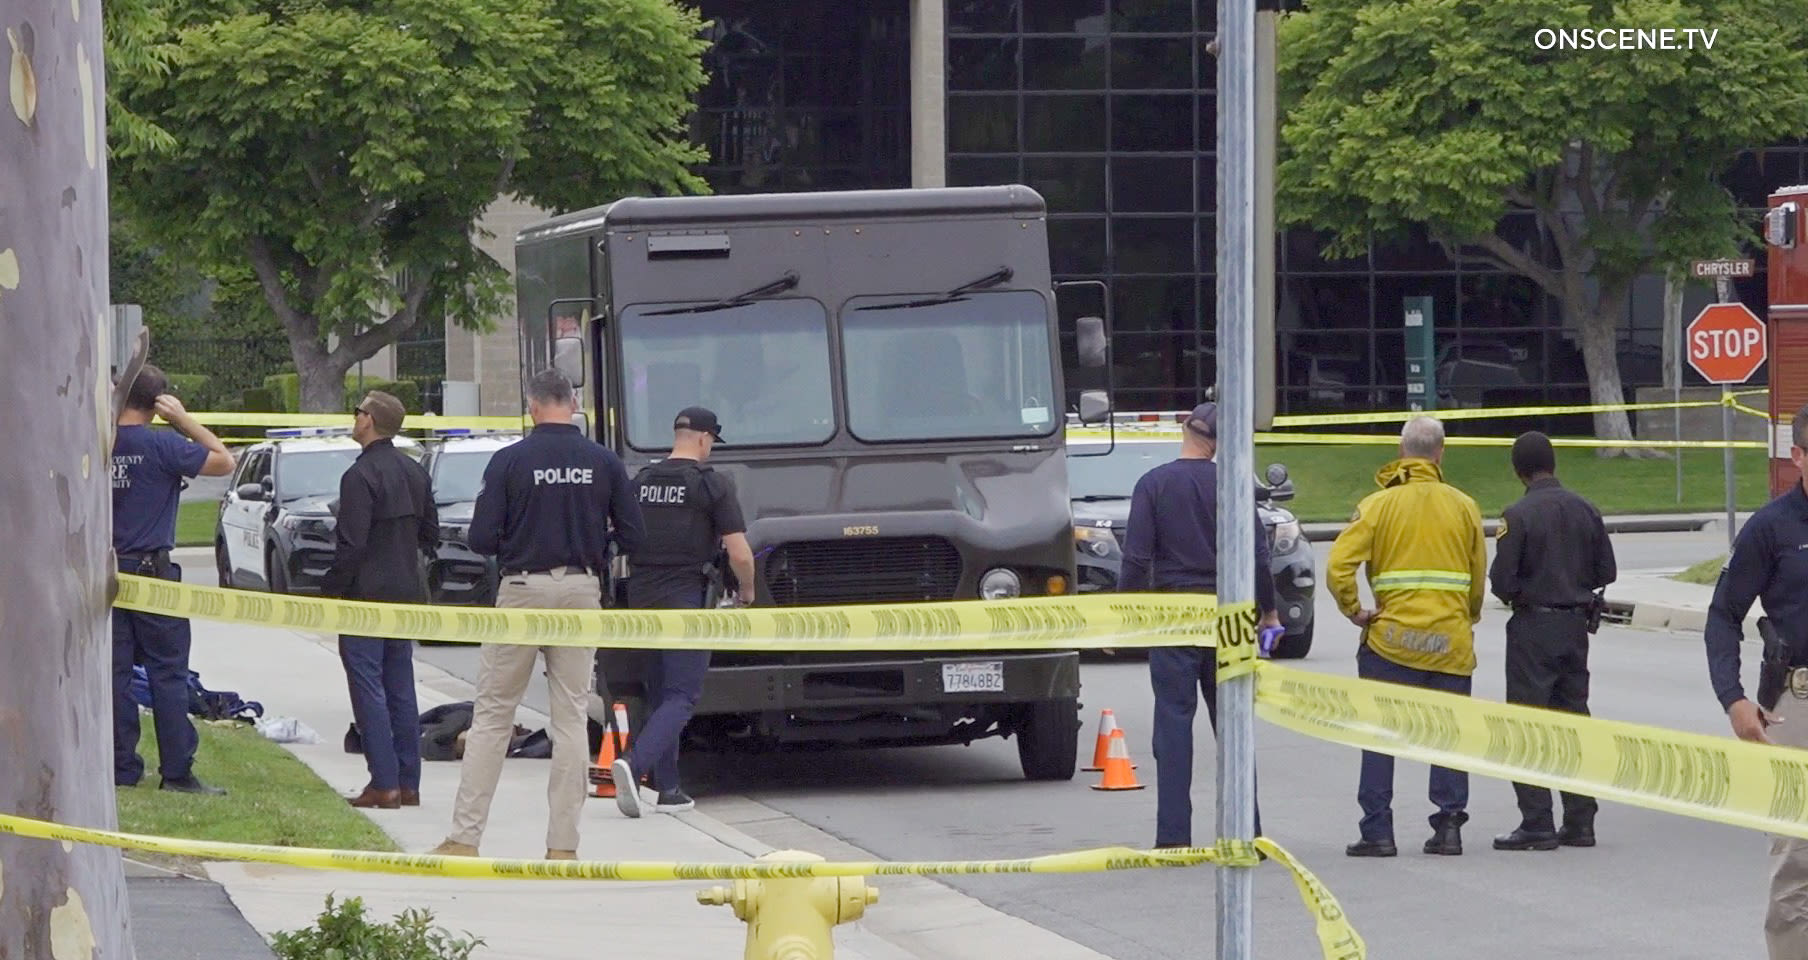 UPS driver fatally shot while sitting in parked van, Irvine police say